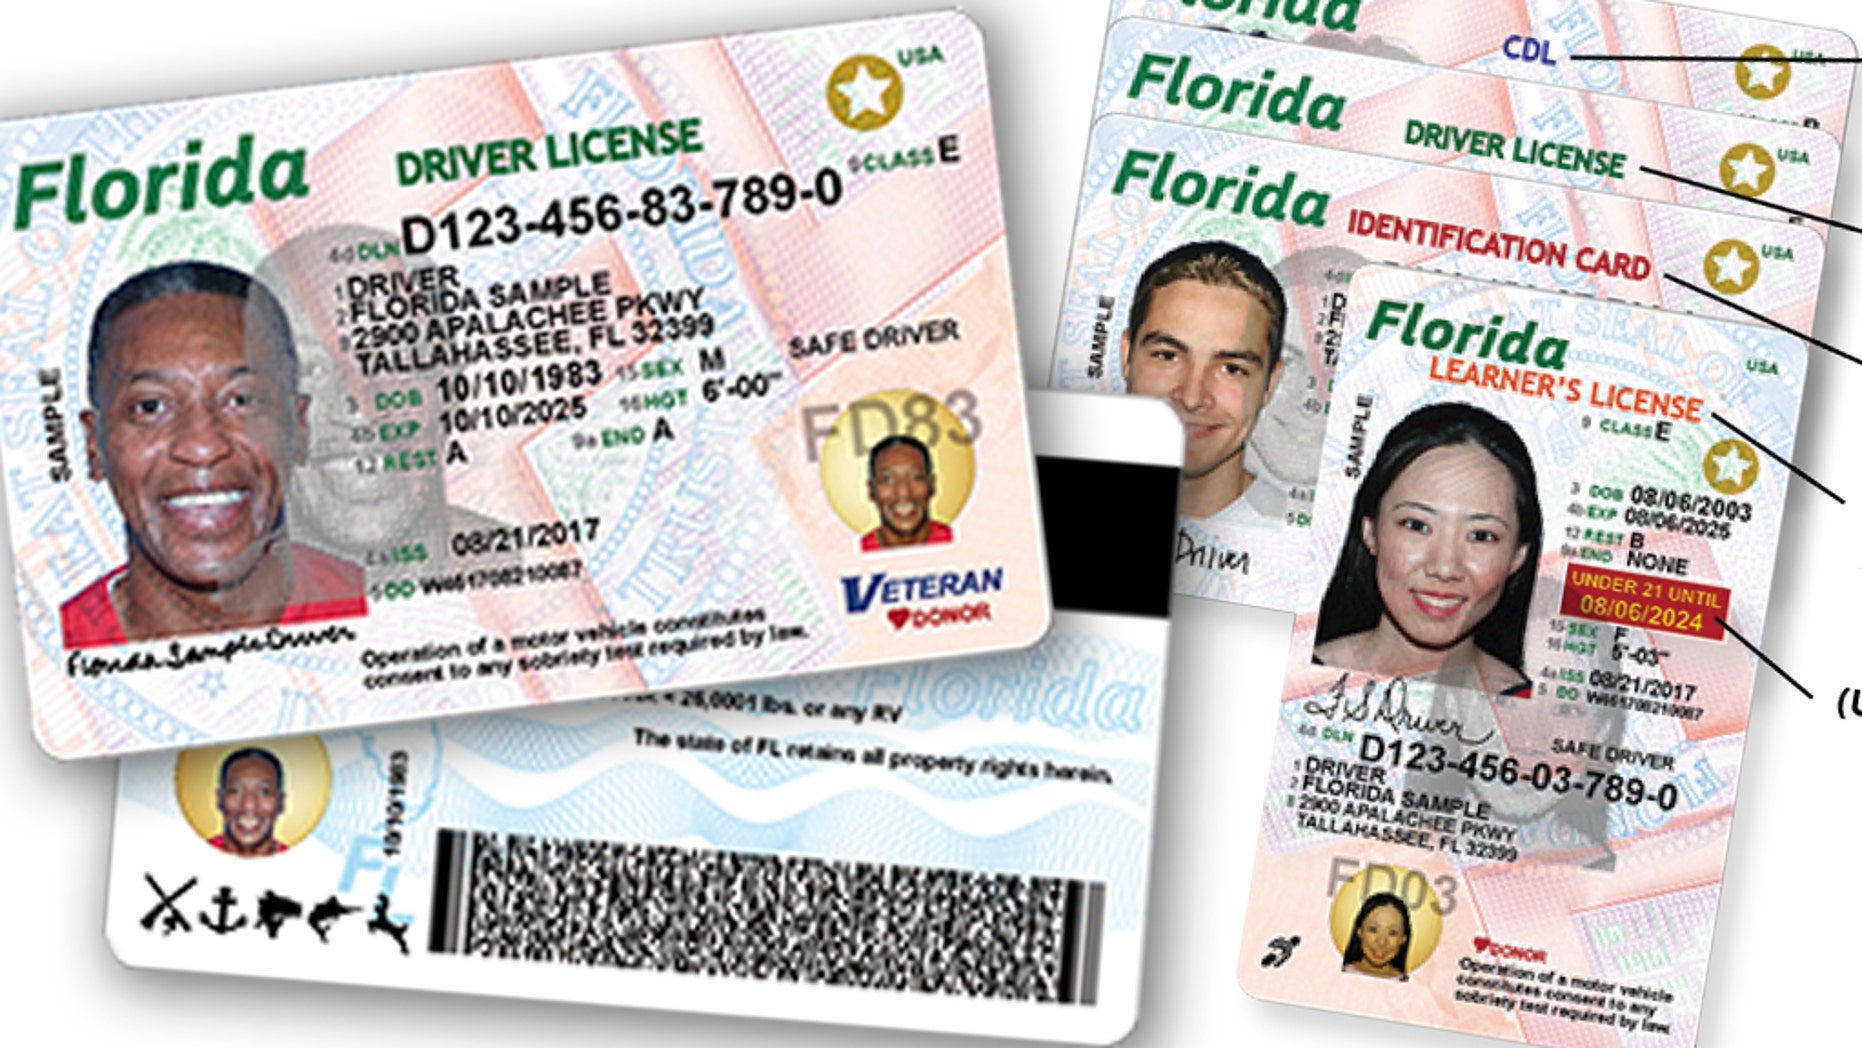 Florida bill would allow illegal immigrants to get driver's licenses